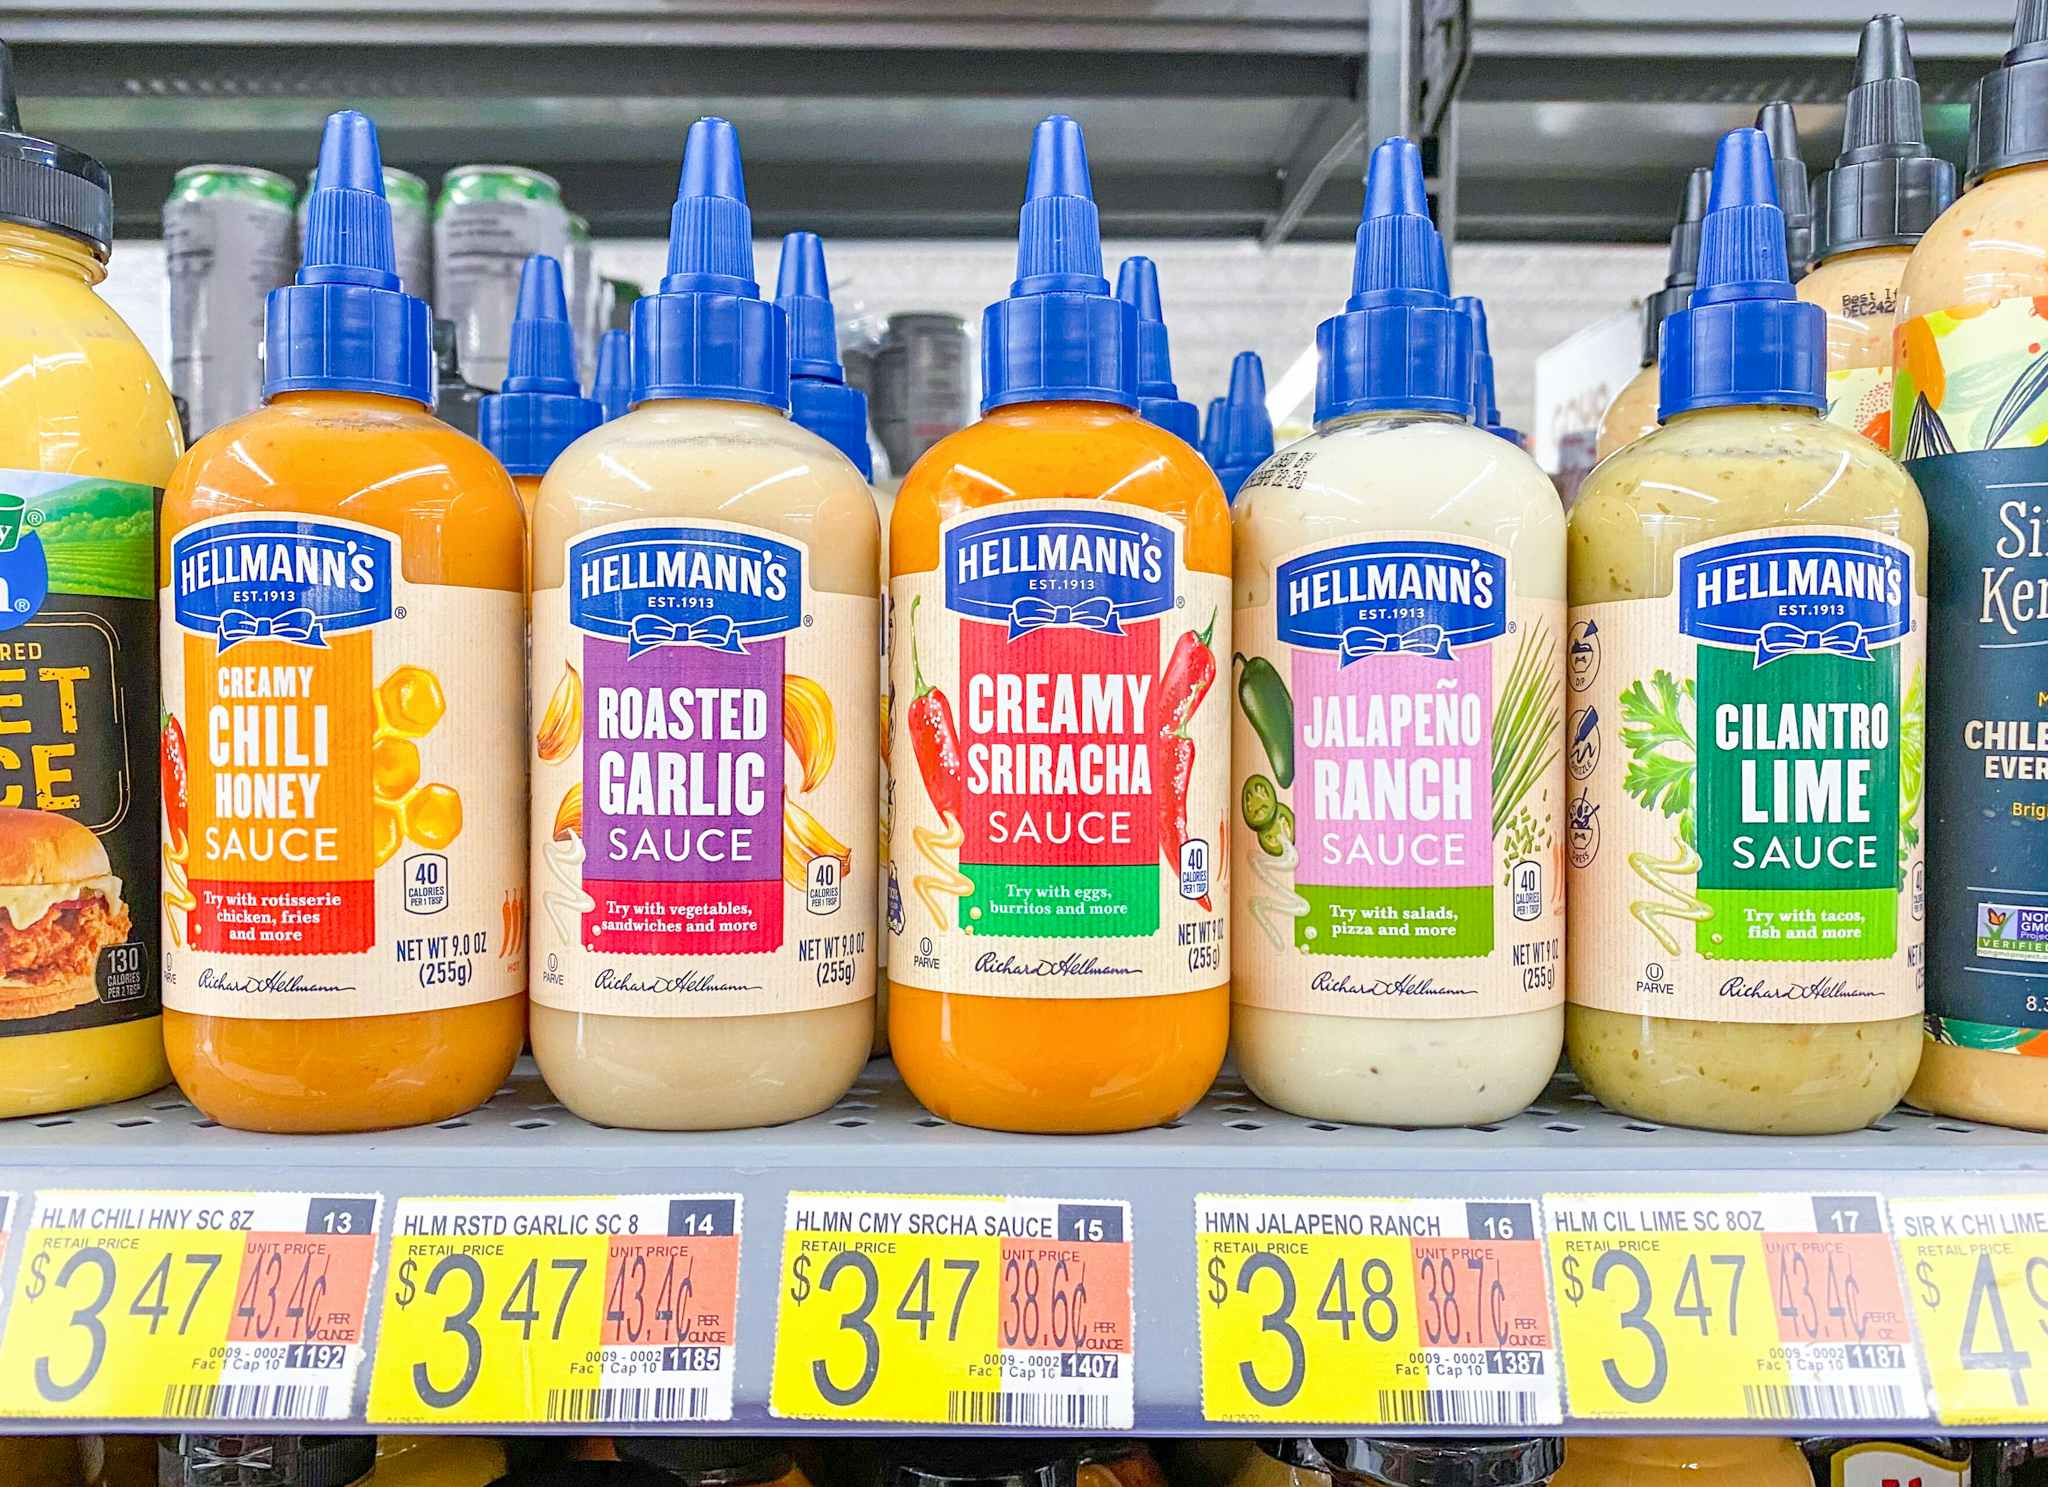 Hellmann's Drizzle Sauce products on shelf at Walmart